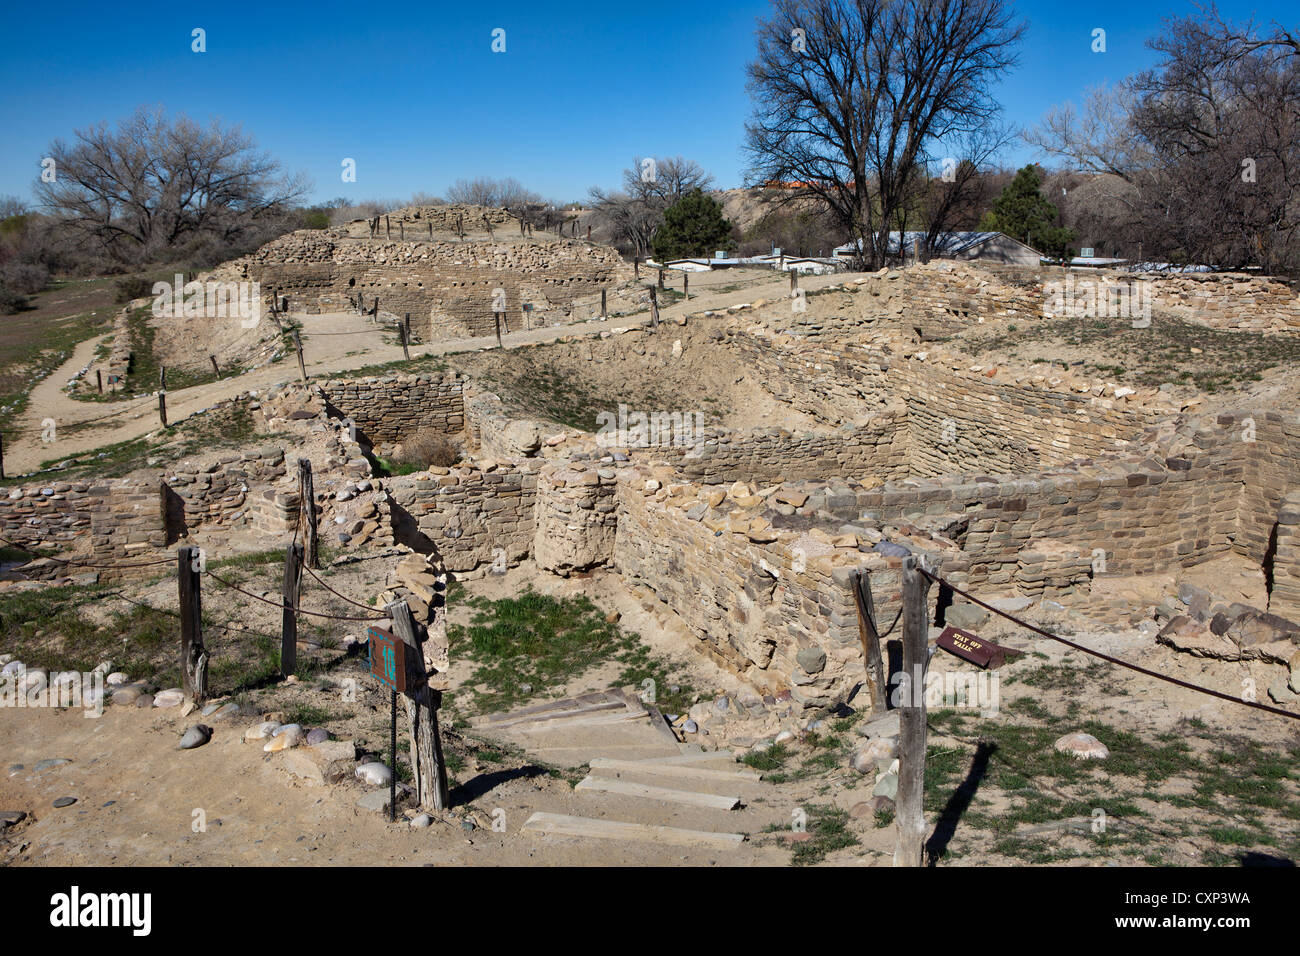 Salmon Ruins & Heritage Park, Ancient Chacoan archaeological ruin site, New Mexico Stock Photo